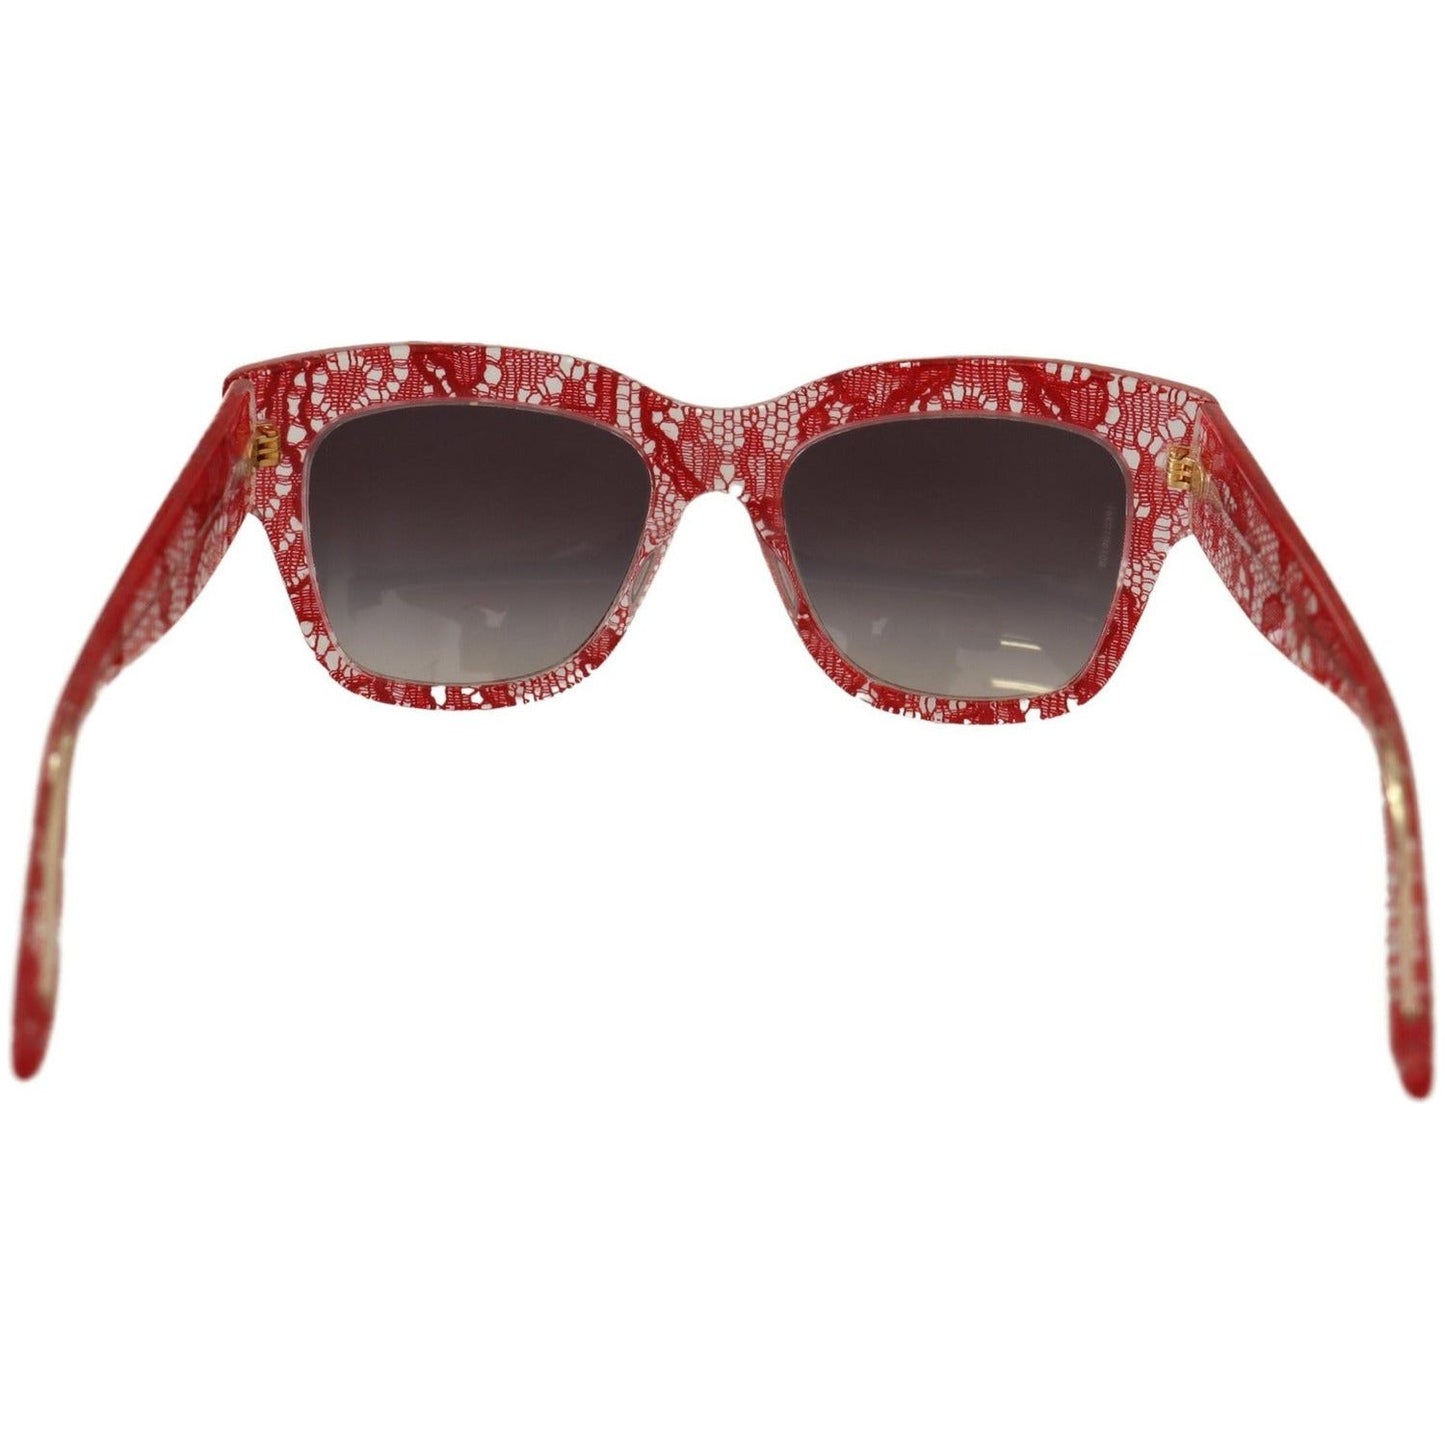 Dolce & Gabbana Sicilian Lace-Inspired Red Sunglasses red-lace-acetate-rectangle-shades-sunglasses-1